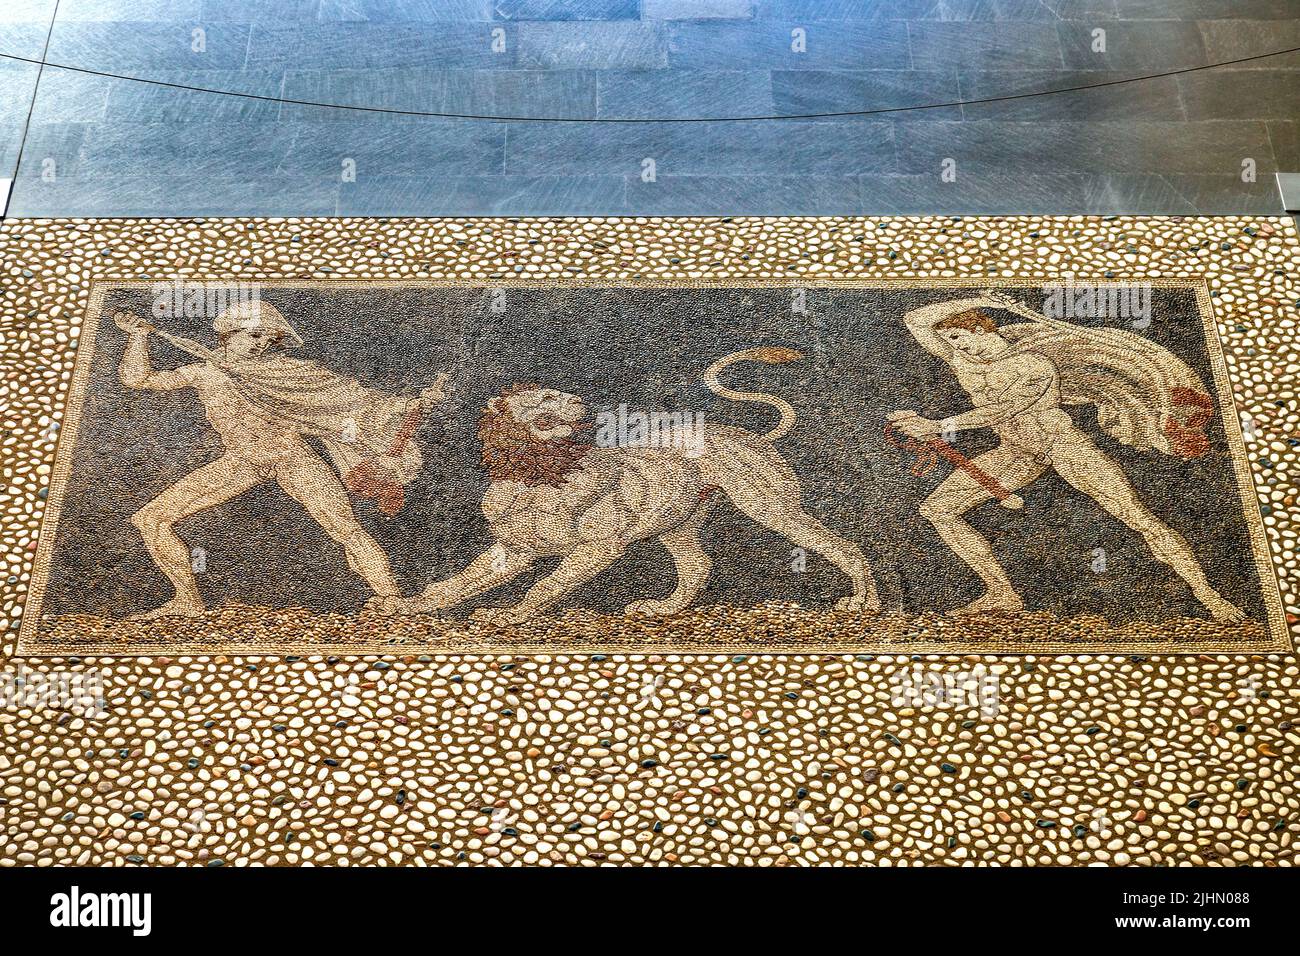 The 'Lion Hunt' (4th century BC), one of the most impressive mosaic floors in the Archaeological Museum of Pella, Macedonia, Greece. Stock Photo